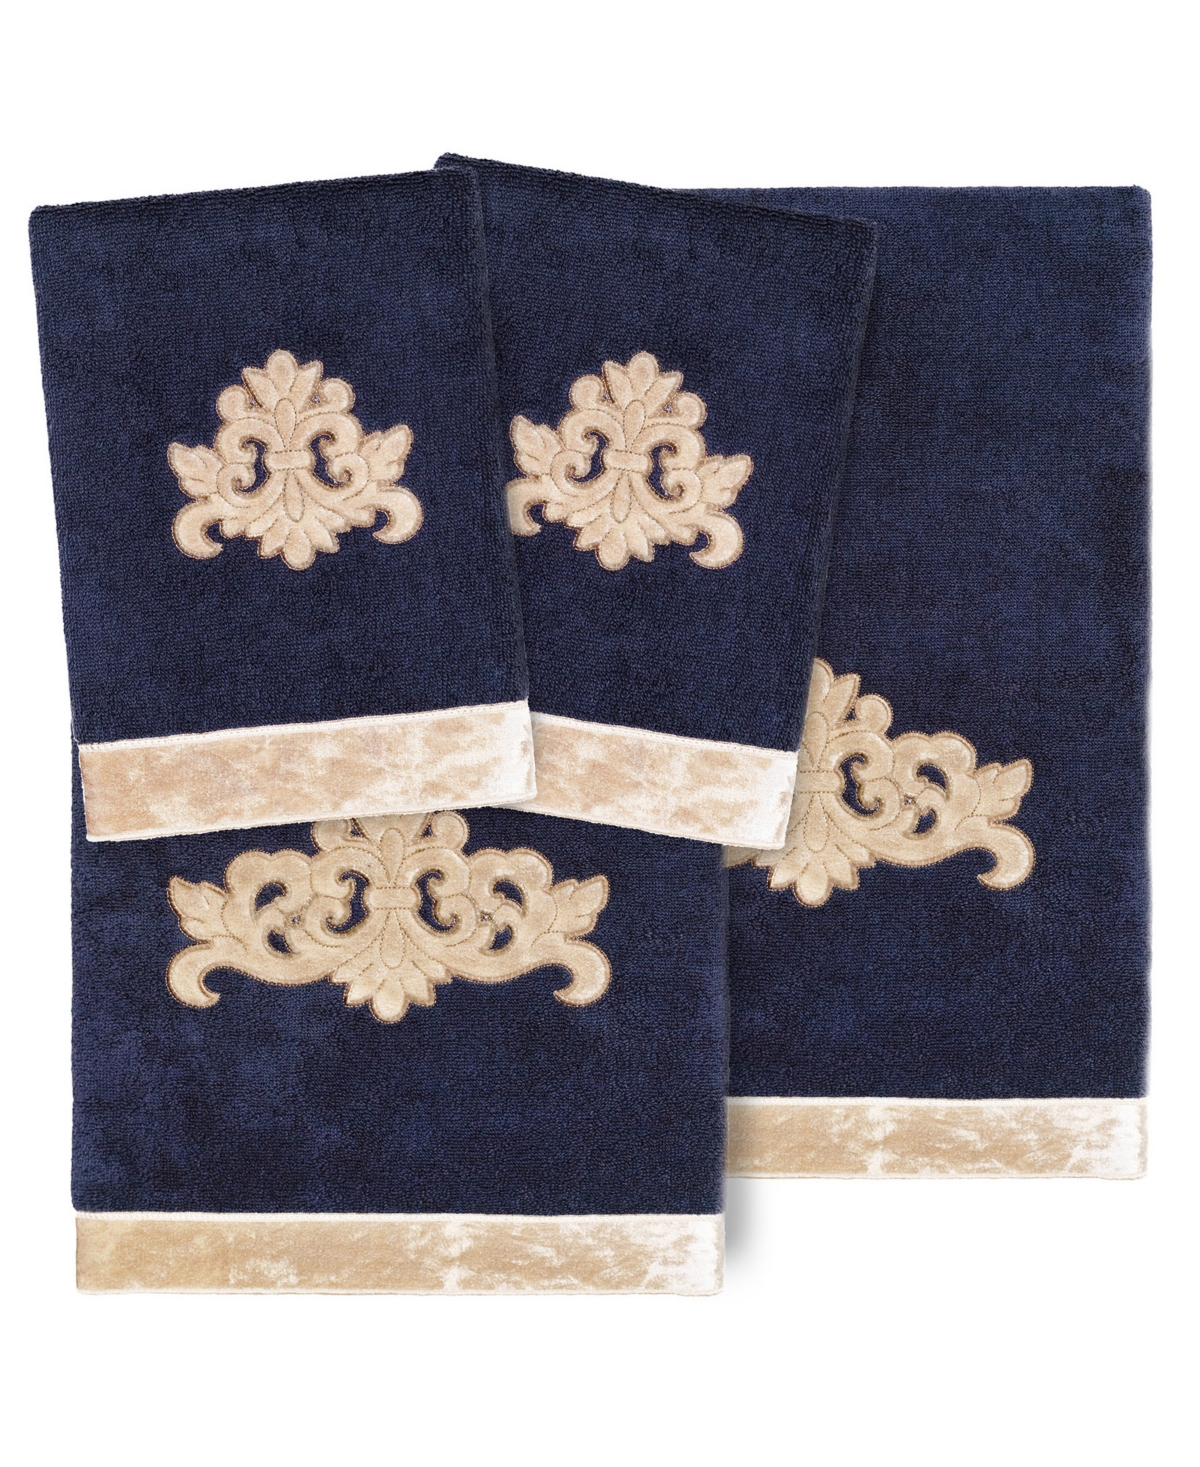 Linum Home Textiles Turkish Cotton May Embellished Towel Set, 4 Piece Bedding In Marine